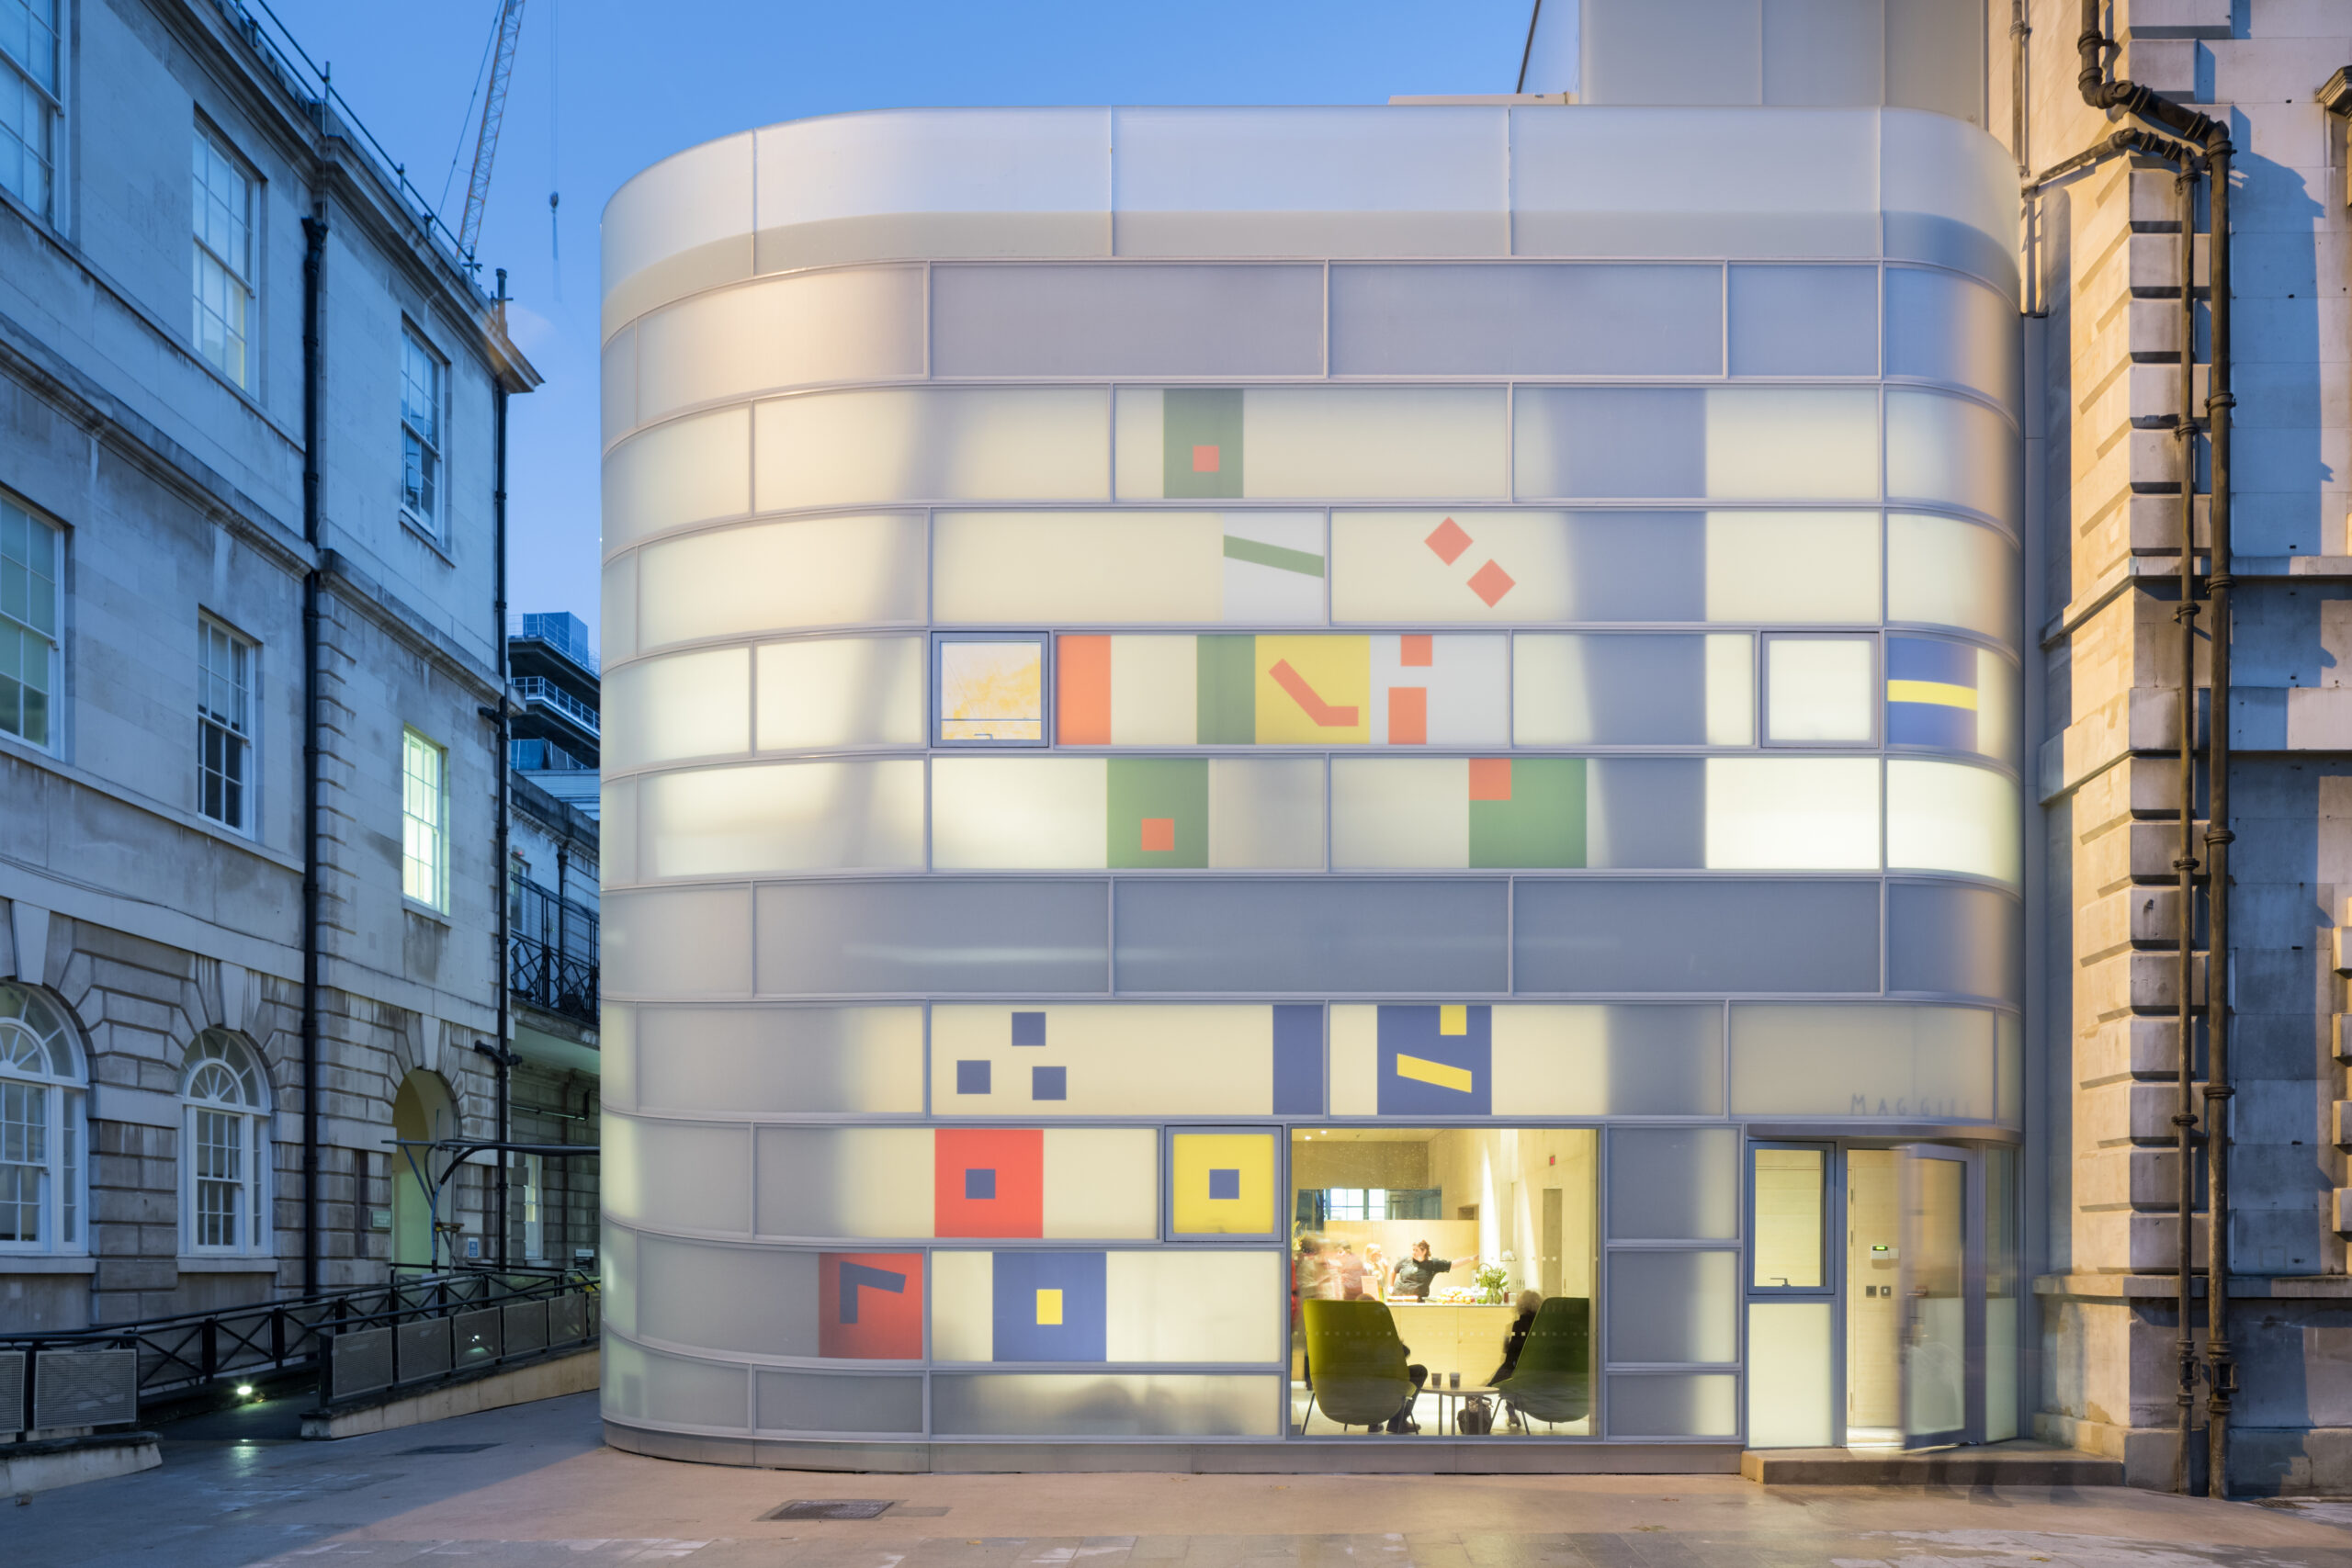 Photo of Steven Holl Architects, Maggie's Centre Barts. The cancer care center’s façade contains colored glass fragments inspired by “neume notation,” a form of Medieval musical notation, connecting to nearby St. Bartholomew’s Hospital and Church of the 12th century.